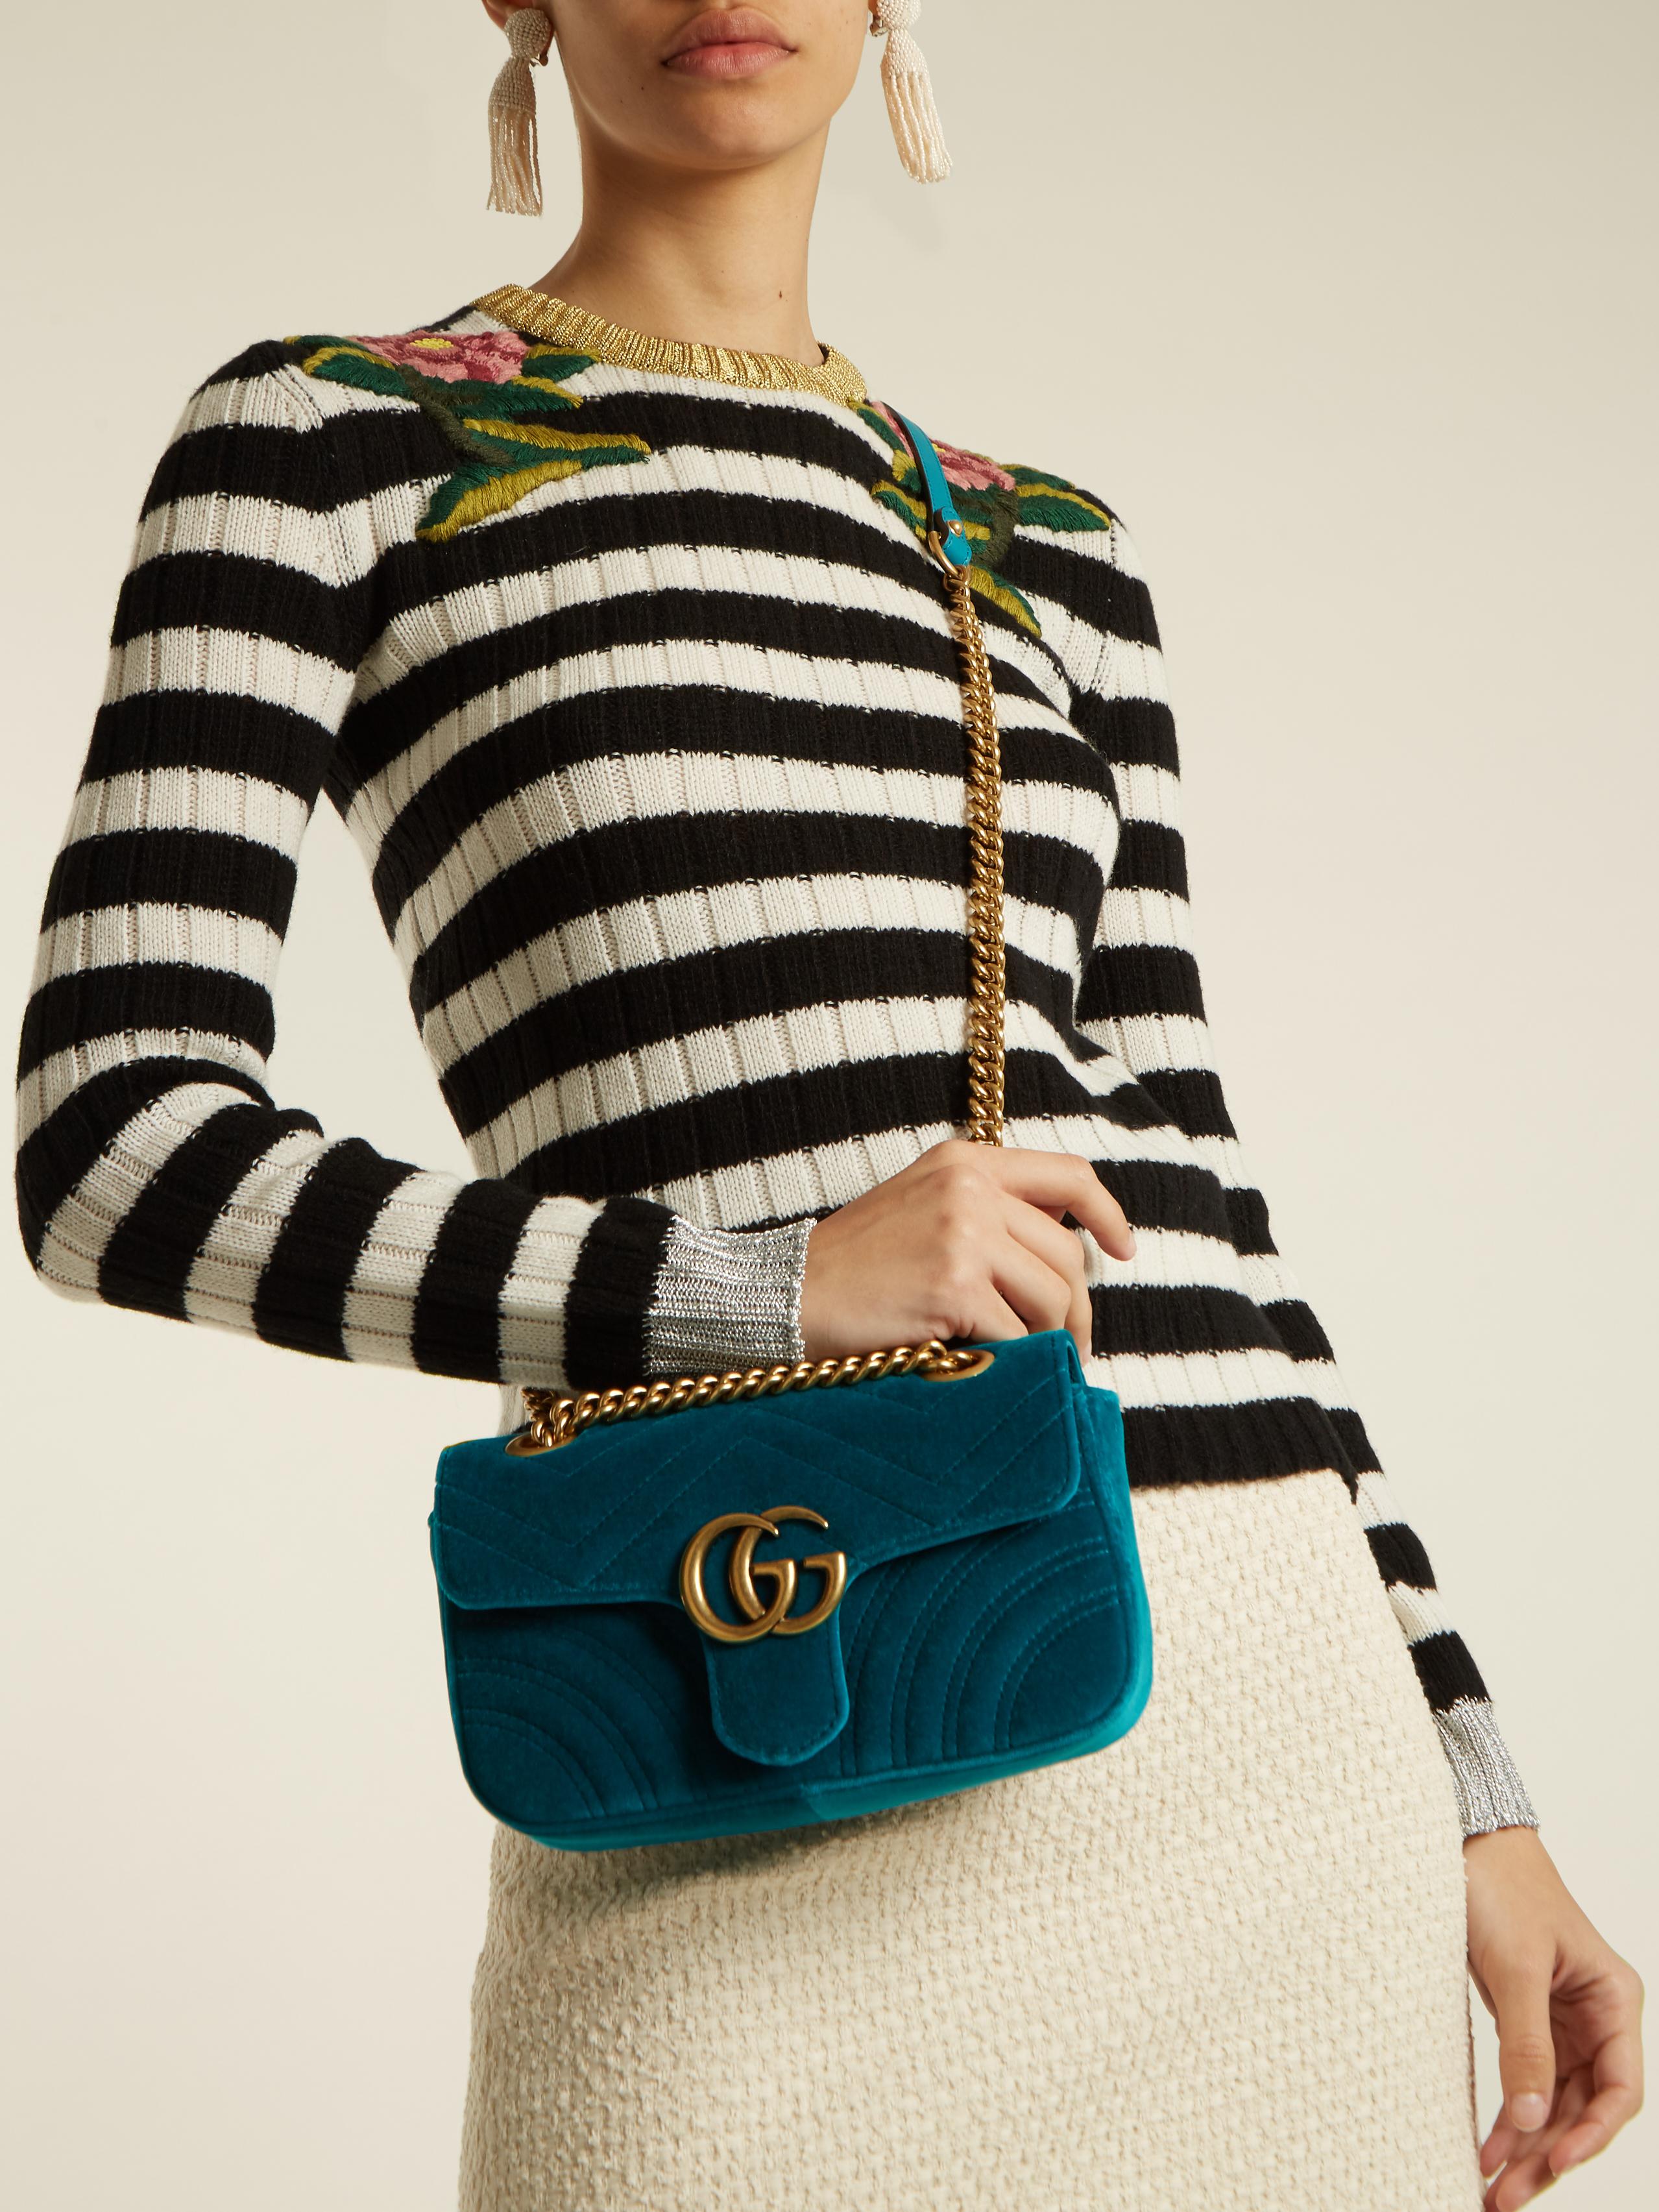 Lyst - Gucci Gg Marmont Small Quilted-velvet Cross-body Bag in Blue